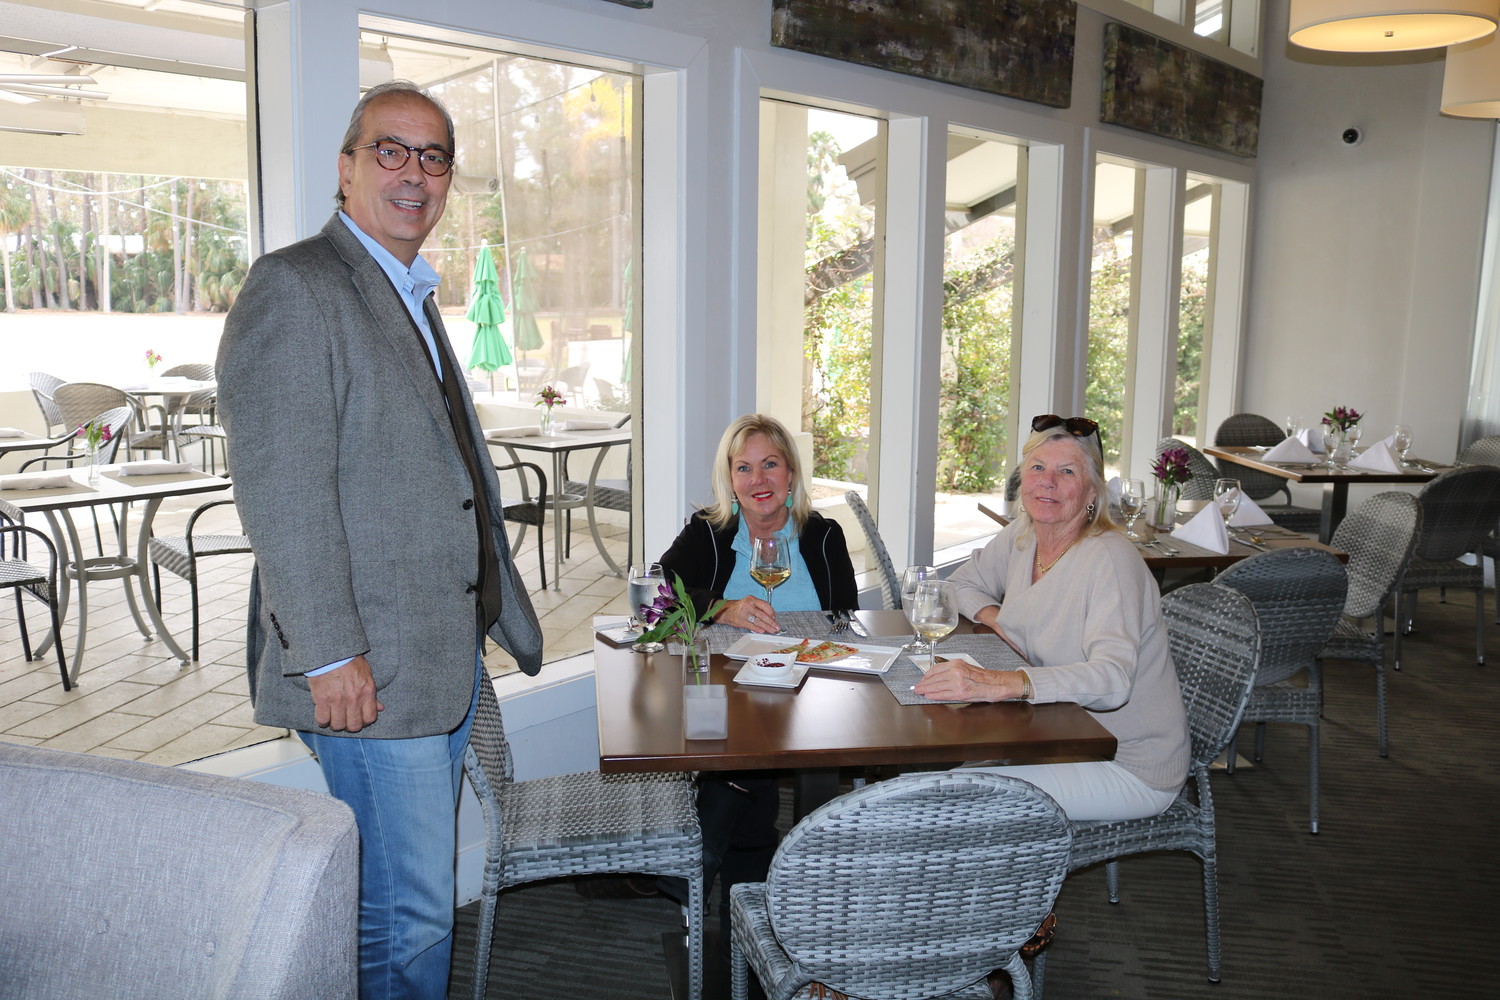 Bernard de Raad poses for a photo with customers enjoying lunch at 3 Palms Grille.